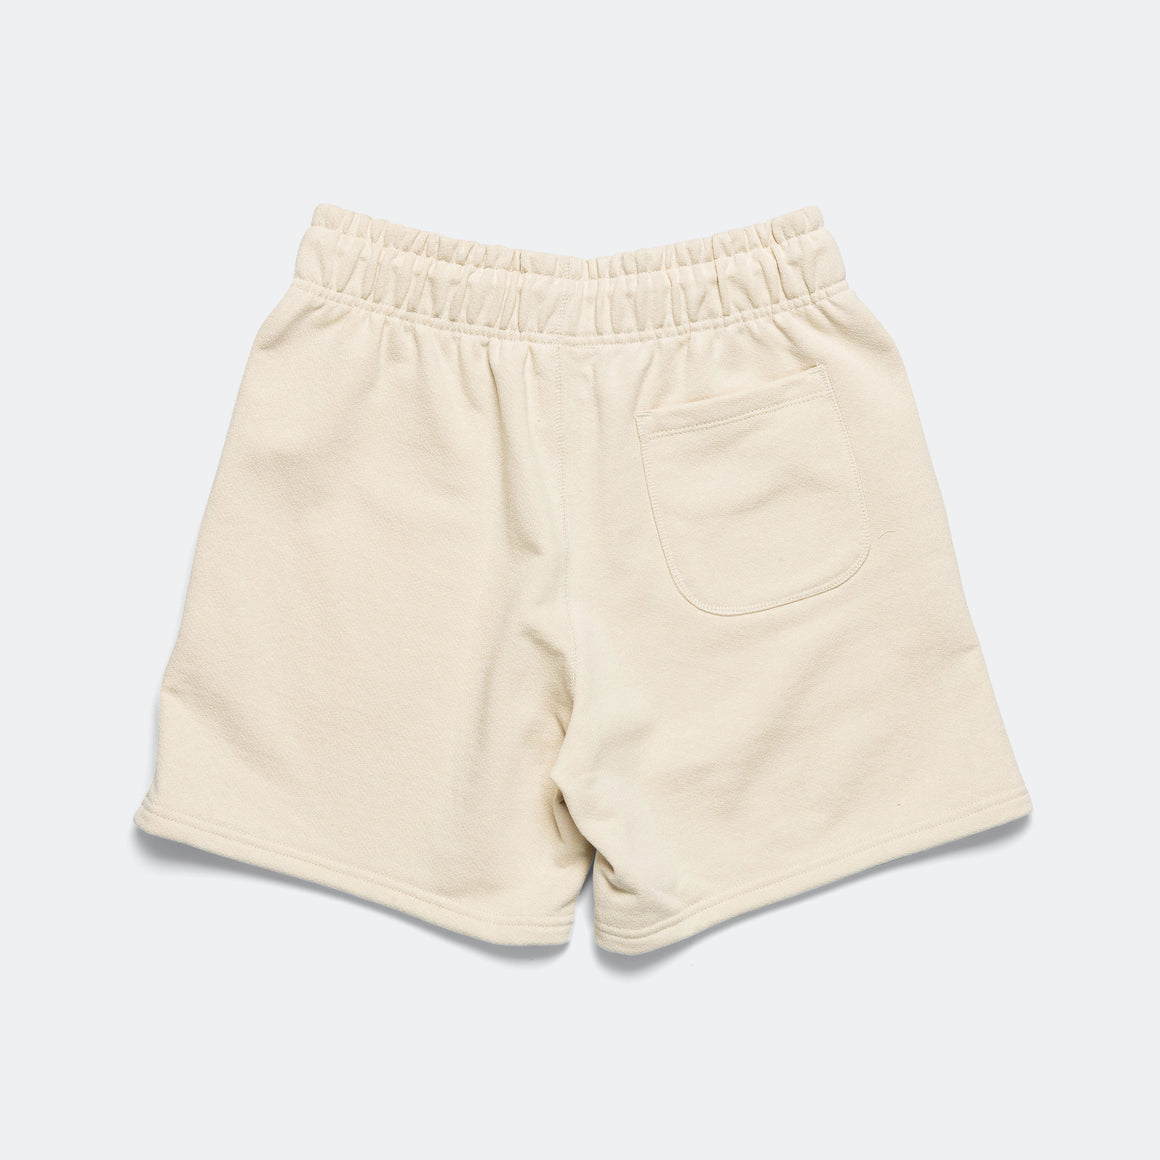 New Balance - MADE in USA Core Sweat Short - Sandstone - UP THERE